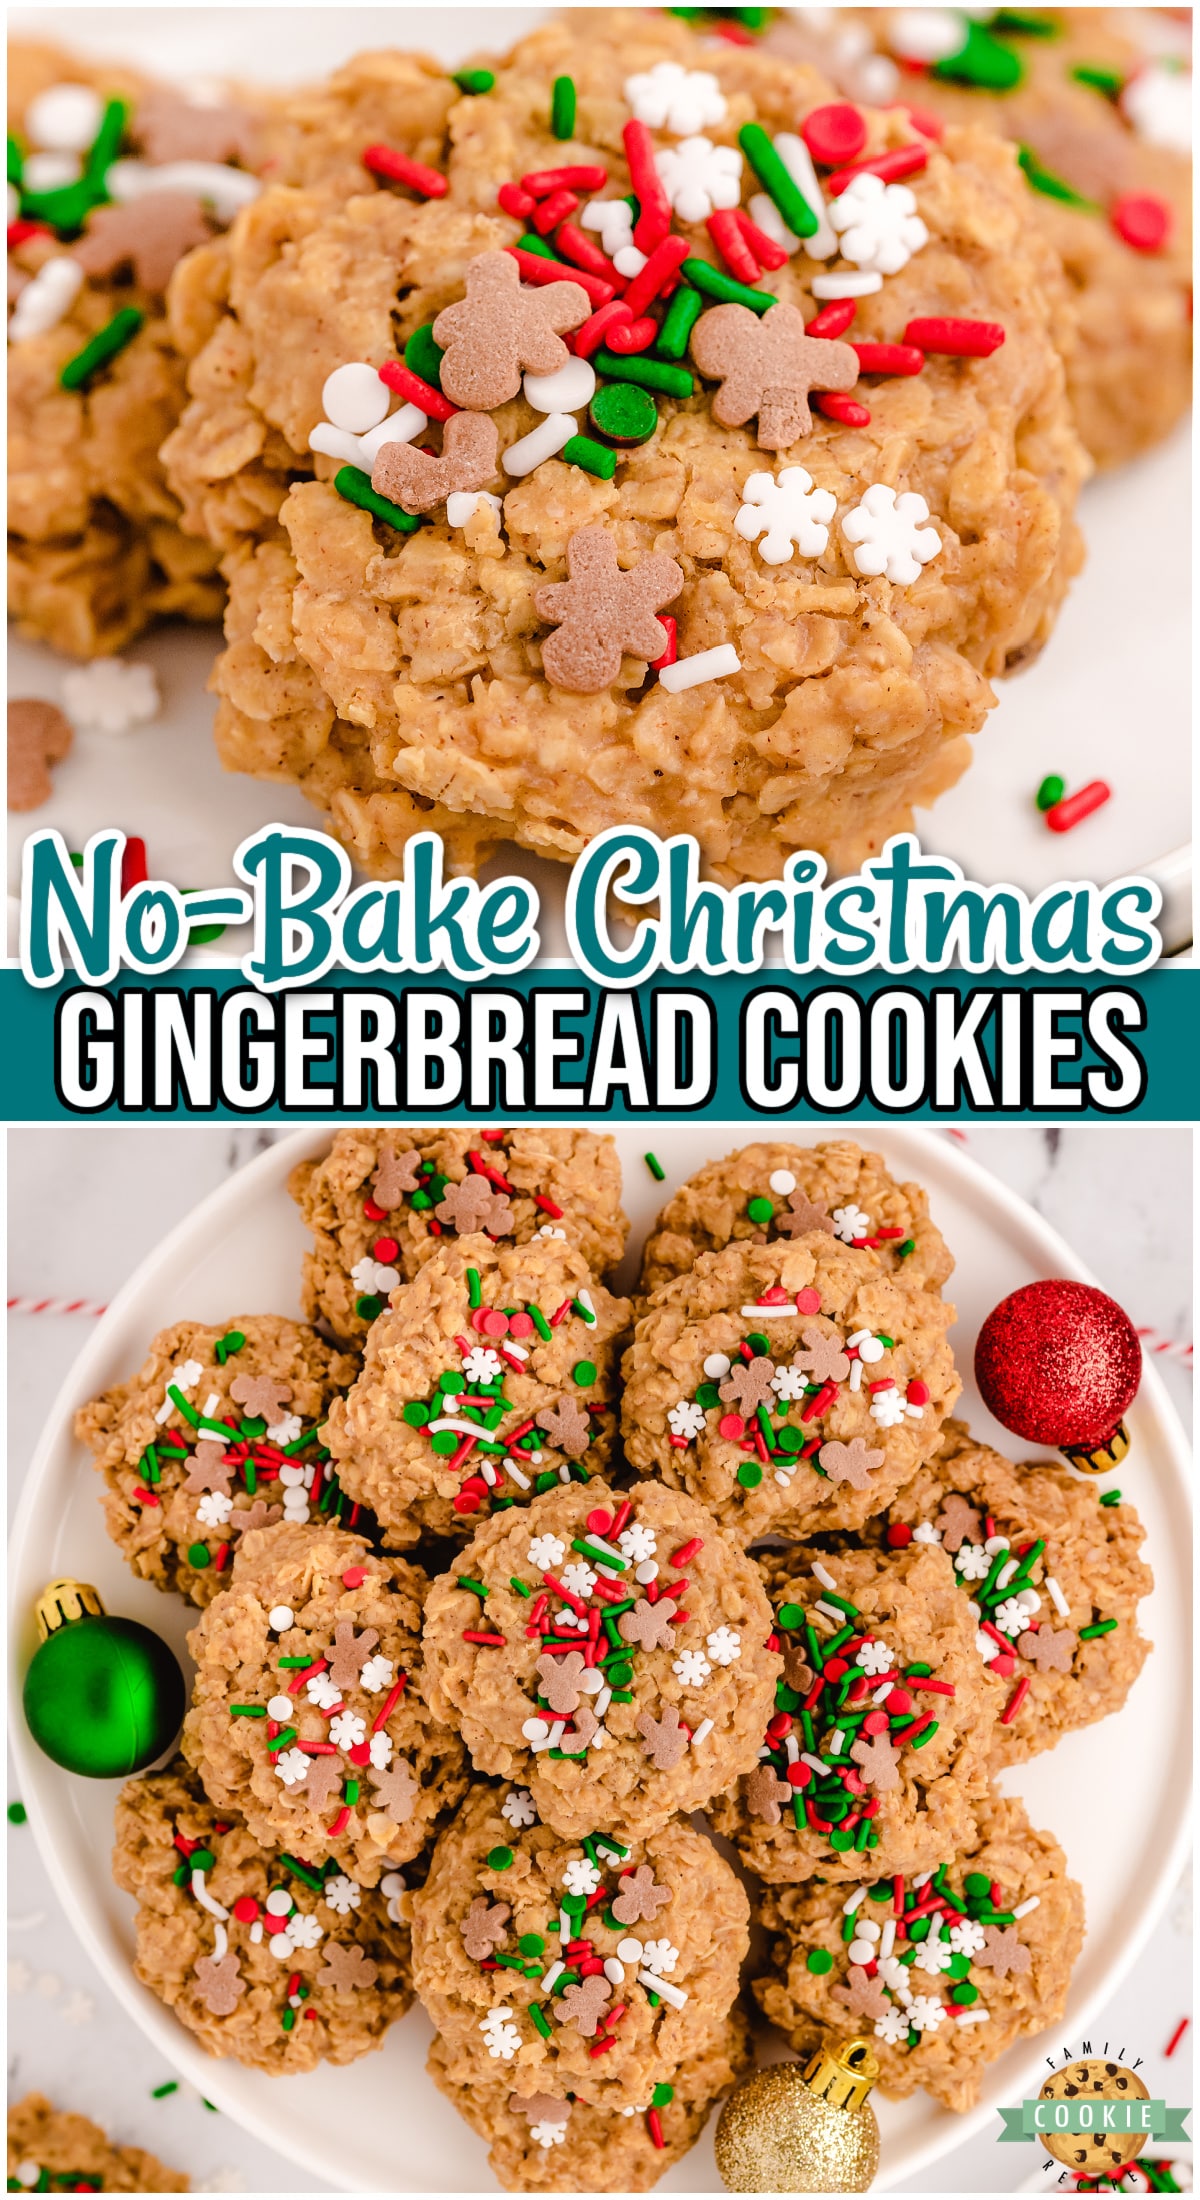 No Bake Gingerbread Cookies made easy with pudding mix, molasses, oats & a blend of warm spices to give these cookies the perfect gingerbread flavor!